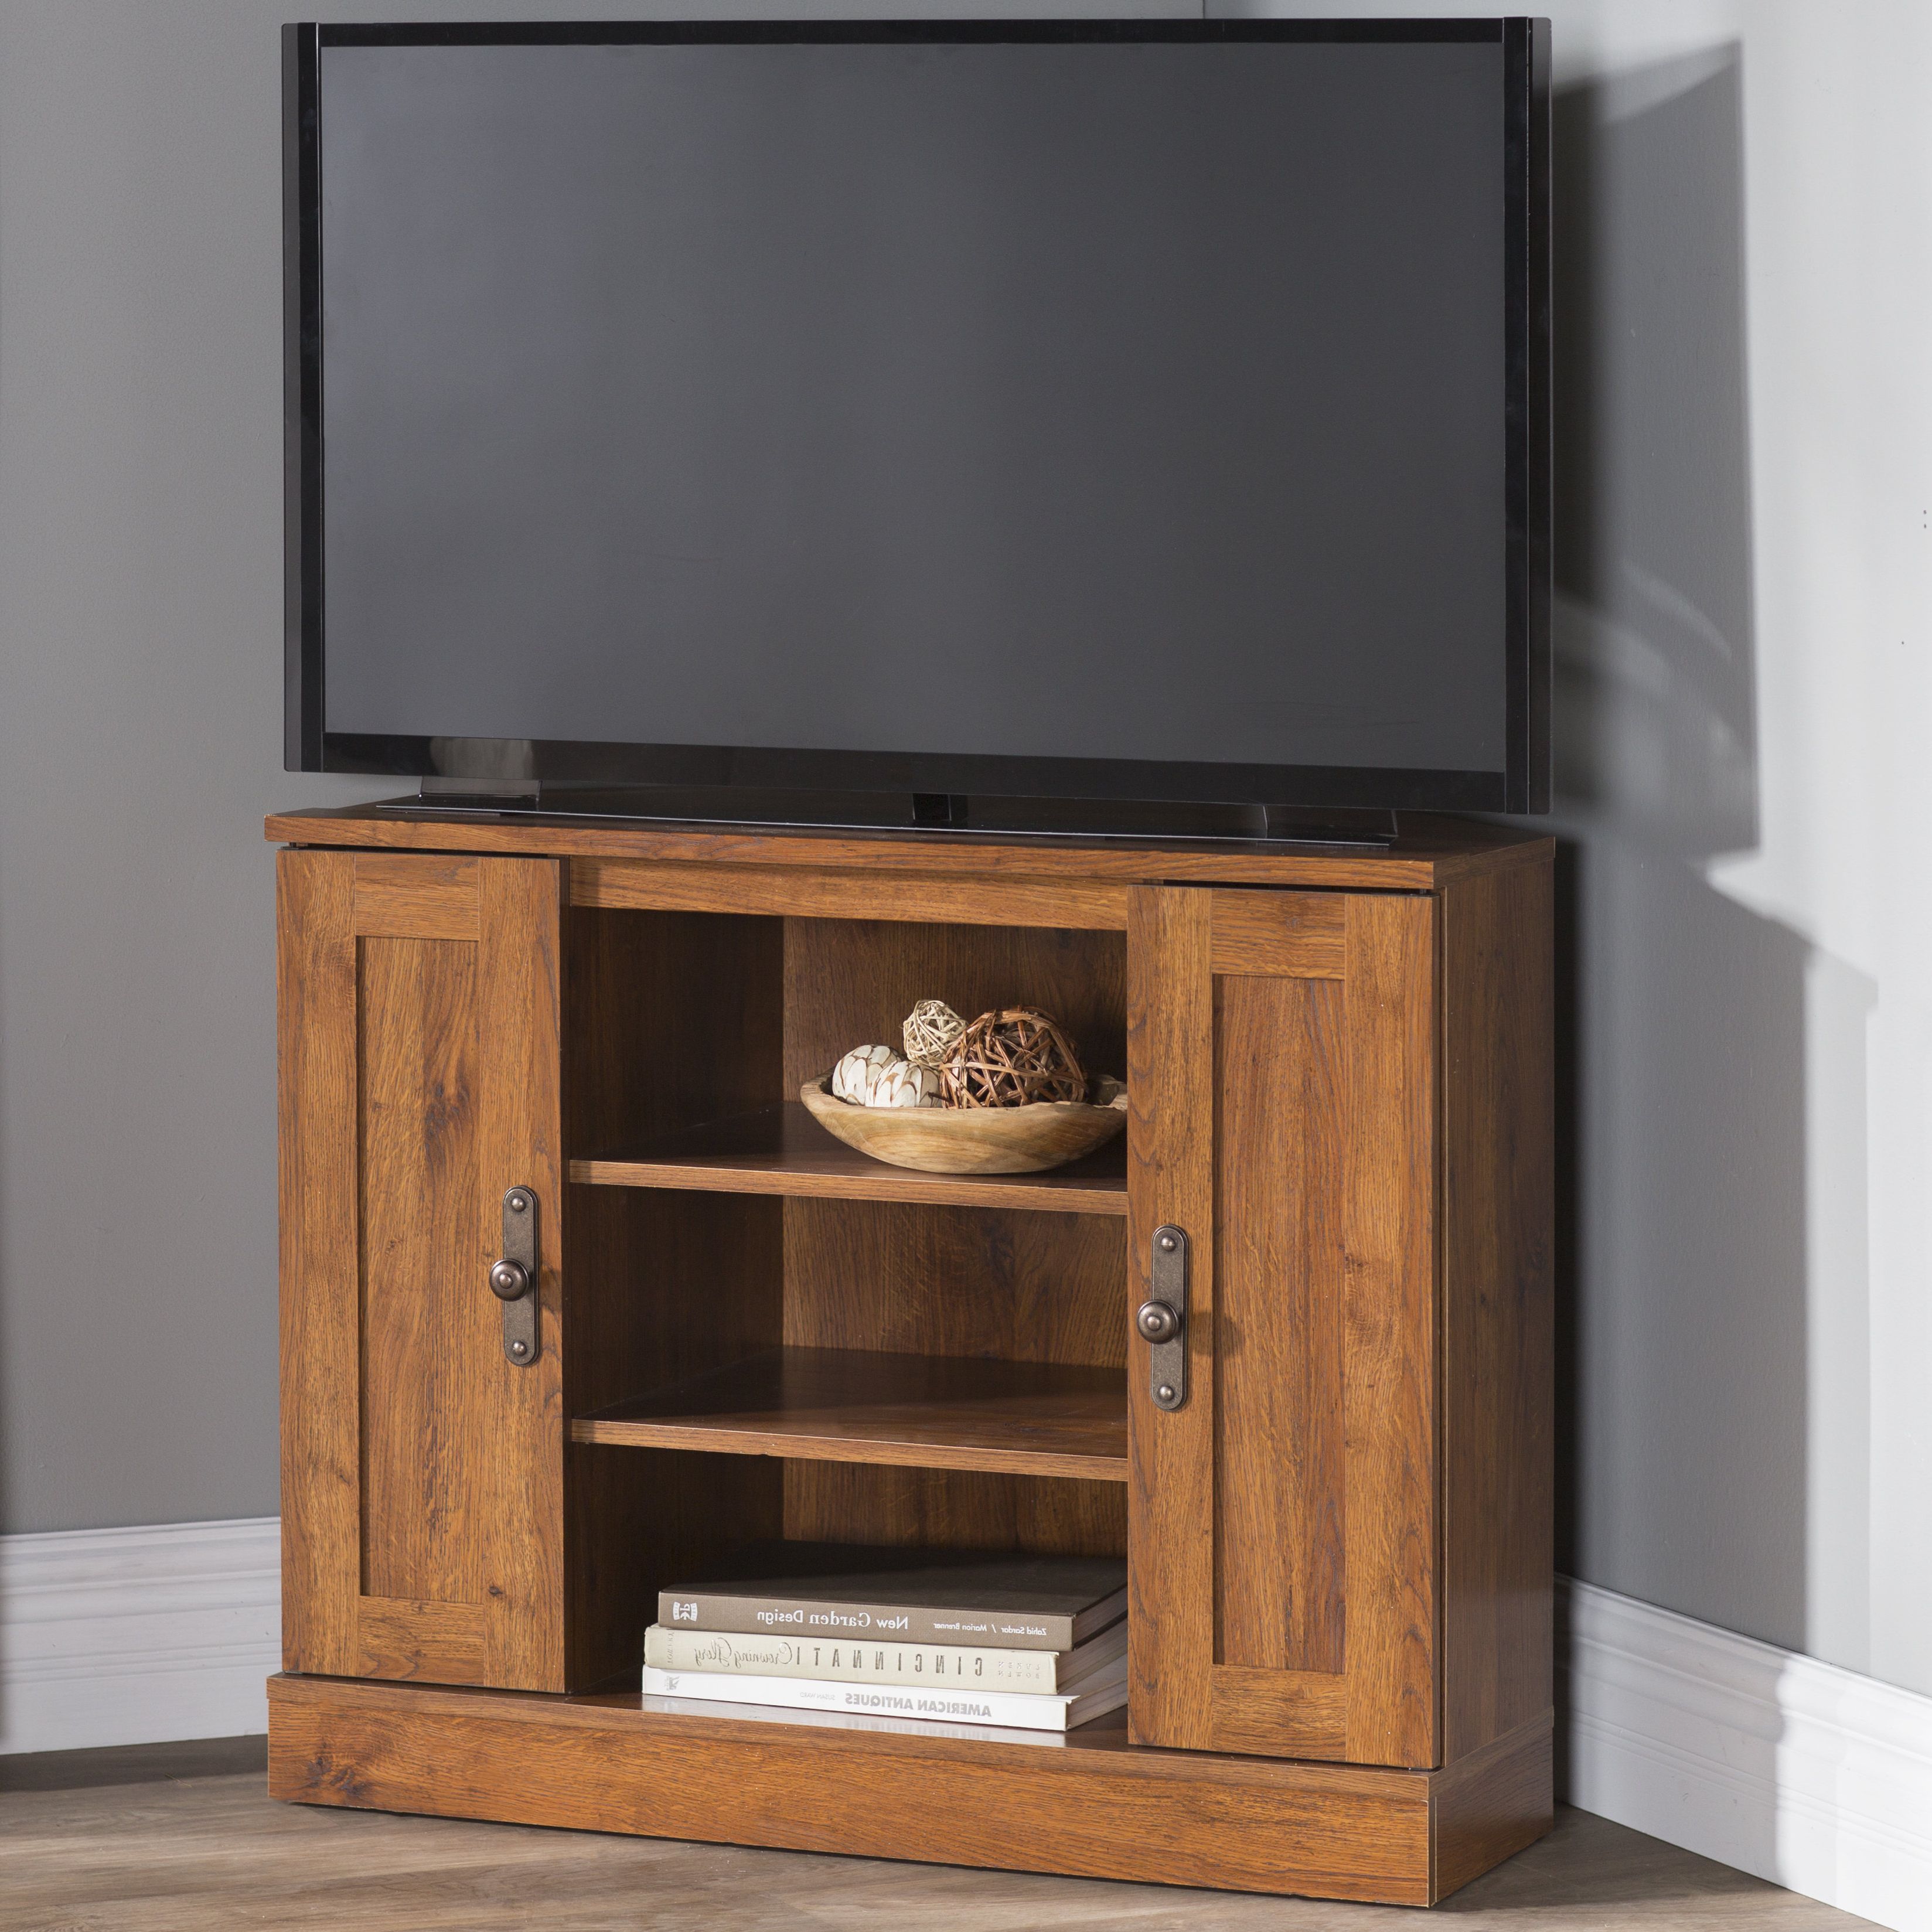 Small Corner Tv Stands Pertaining To Most Recently Released Small Corner Tv Stand (View 4 of 20)